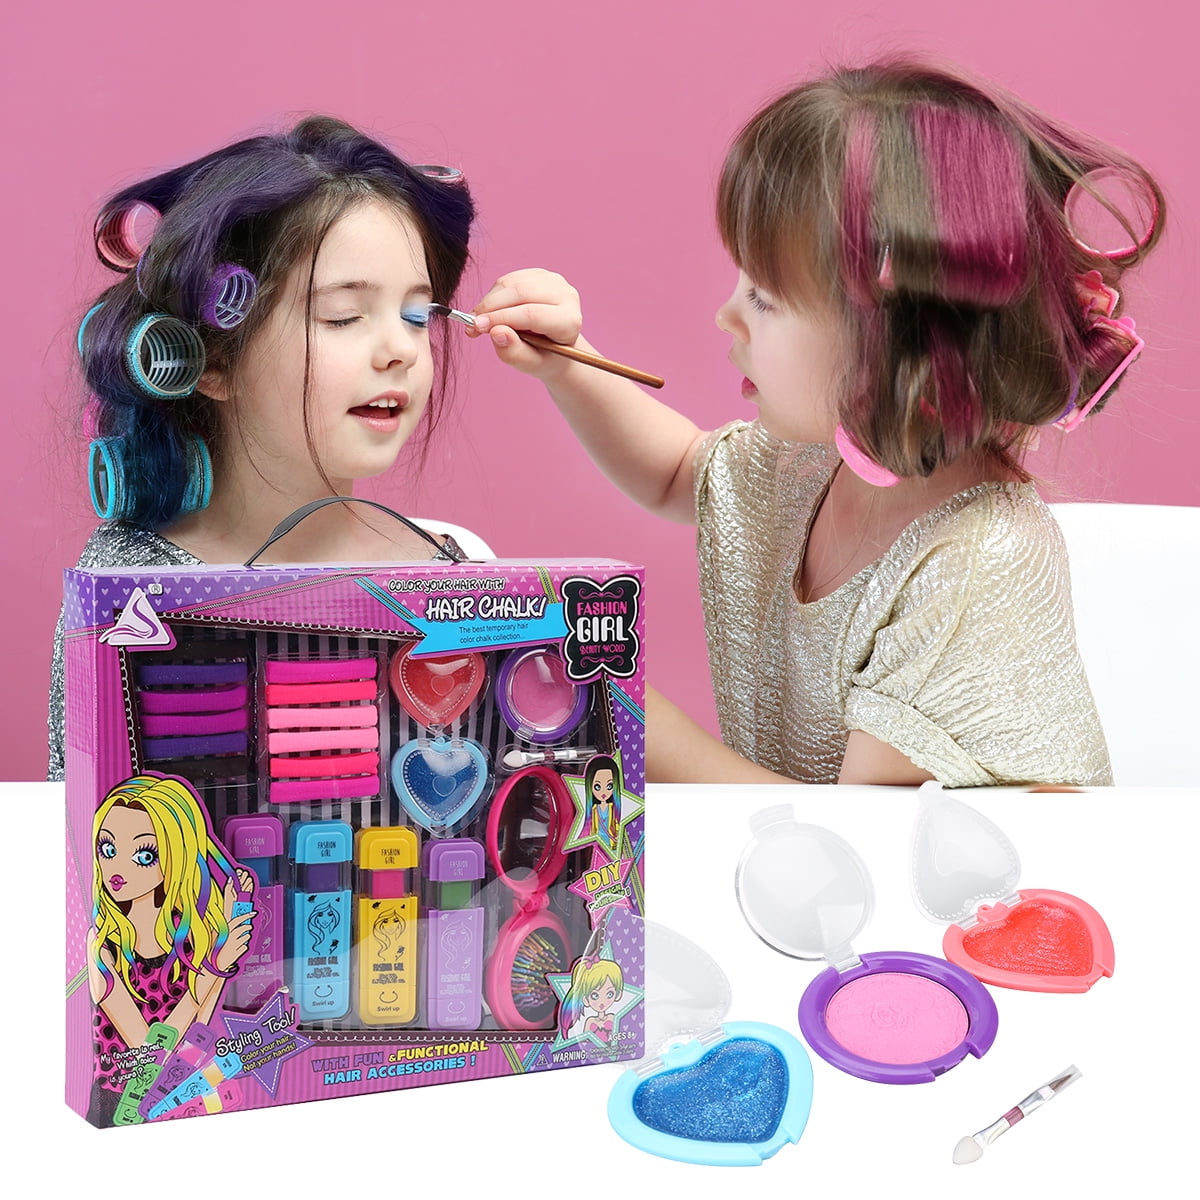 Shinehalo J-507 Portable Styling Temporary Hair Chalk Set Non-Toxic Dye Hair  Coloring Stick with Glittering Eye Shadow Comb Mirror Blusher Lip Gloss  Rubber Band Brush Accessories 21 Pcs Cosmetic Sets 